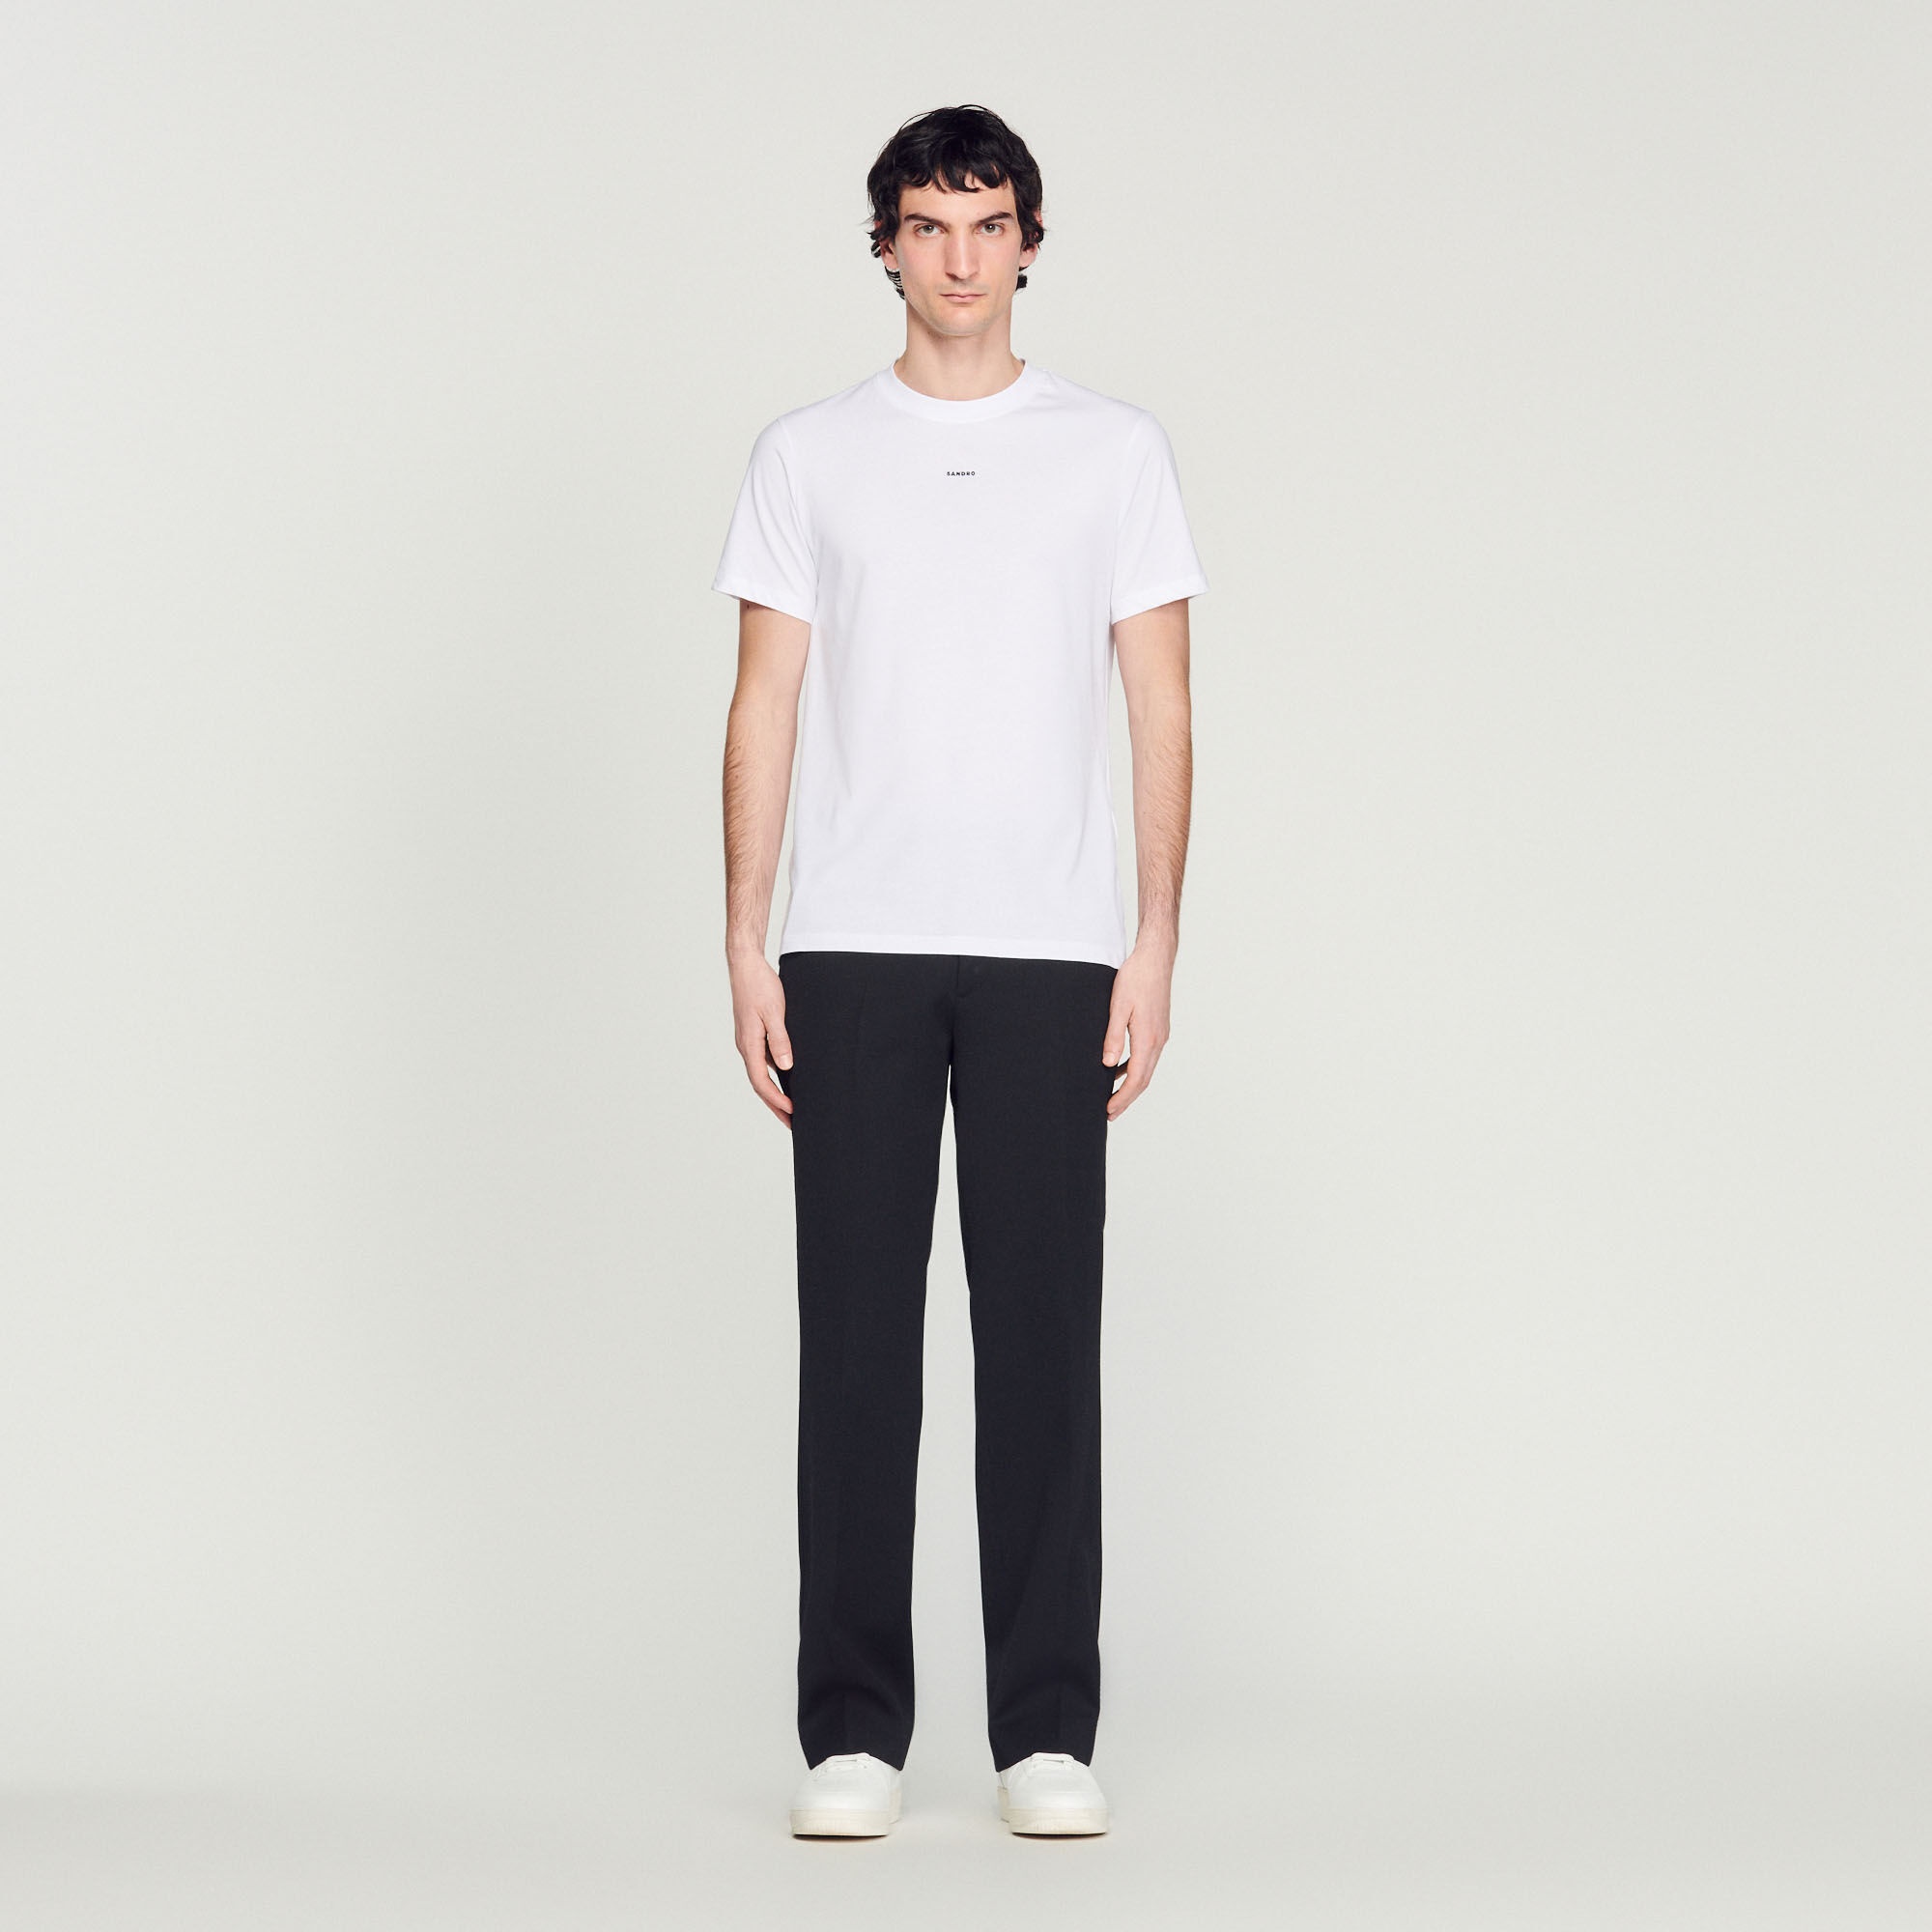 SANDRO EMBROIDERED T-SHIRT - 3